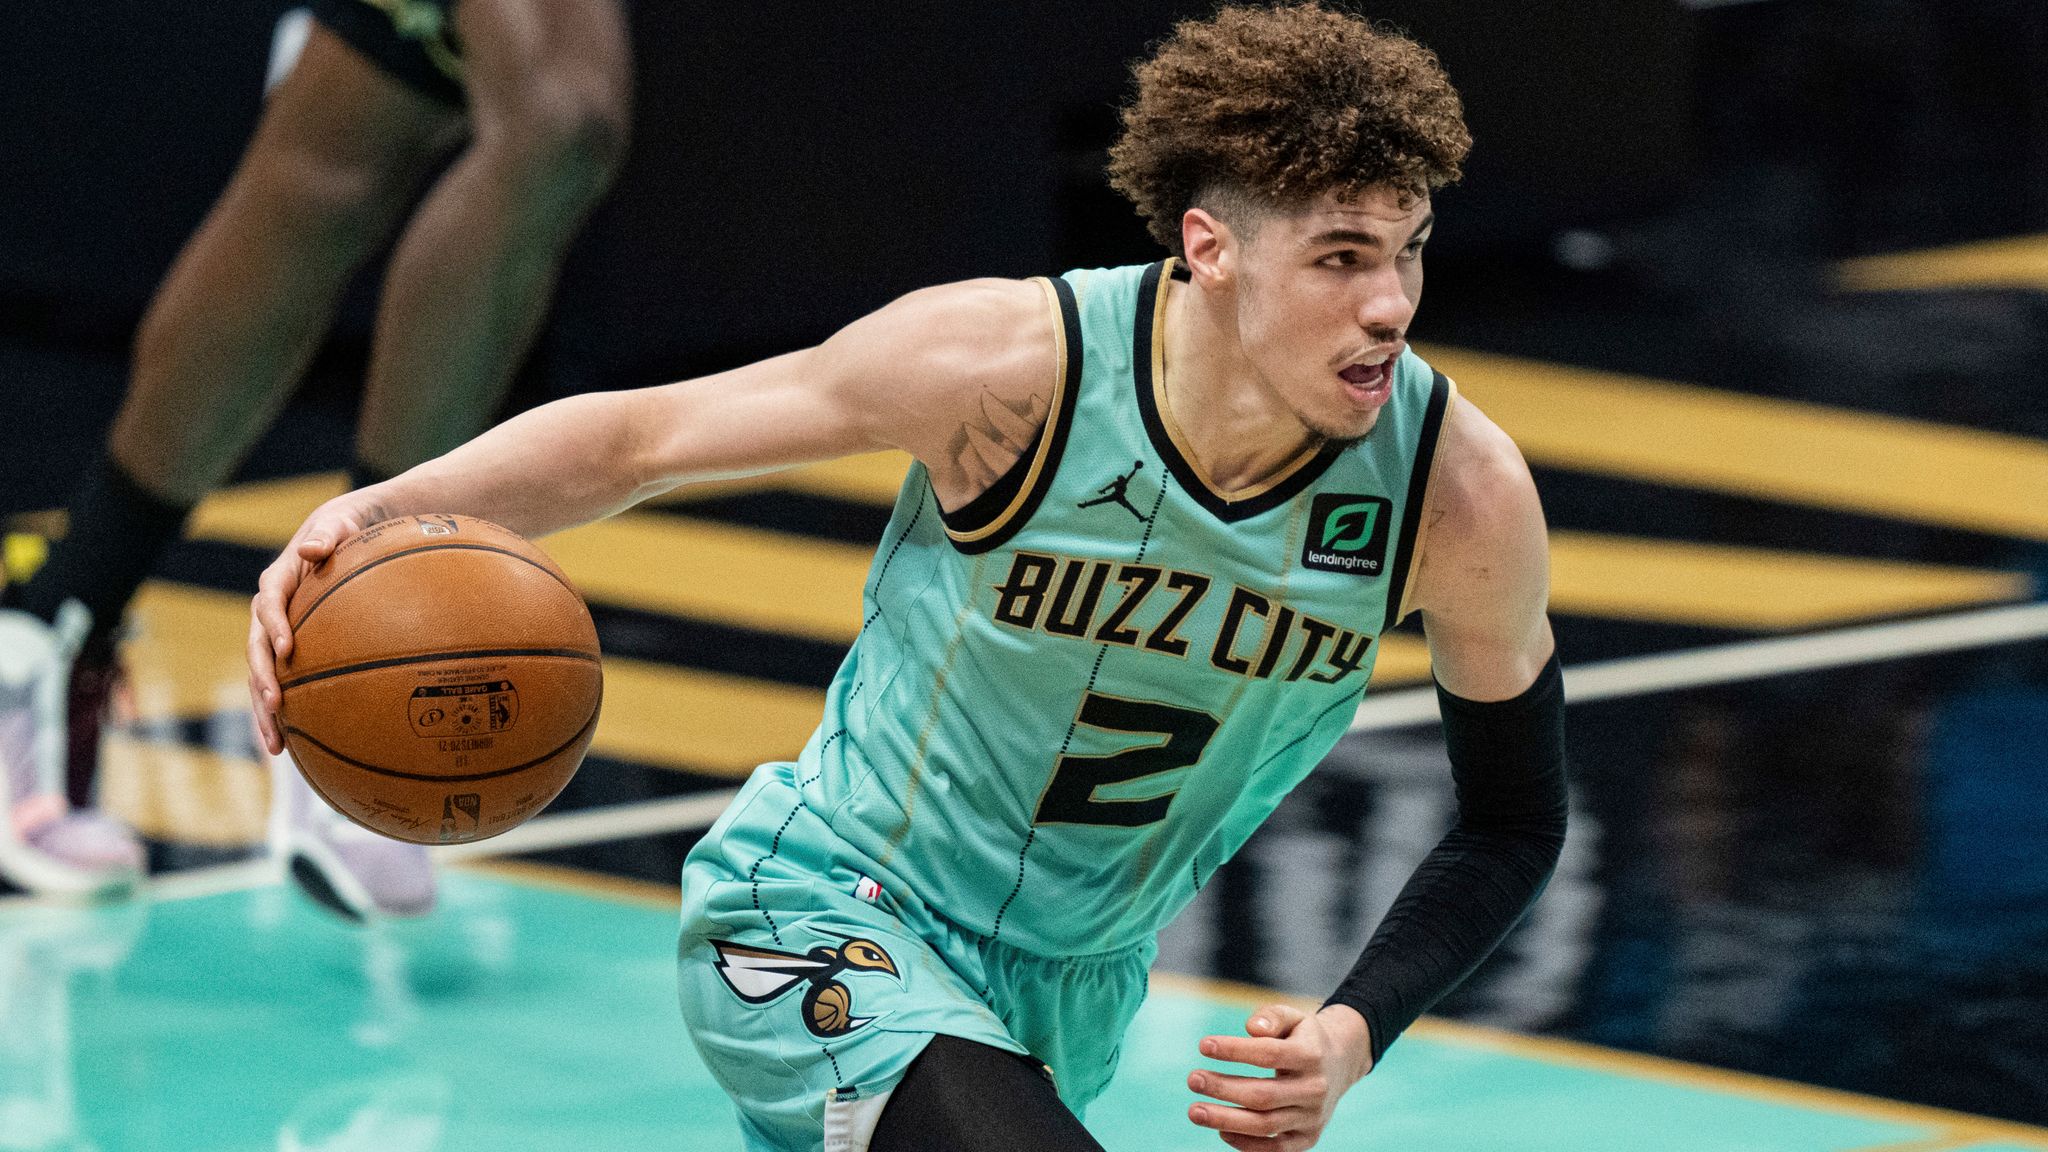 Charlotte's LaMelo Ball Named N.B.A.'s Rookie of the Year - The